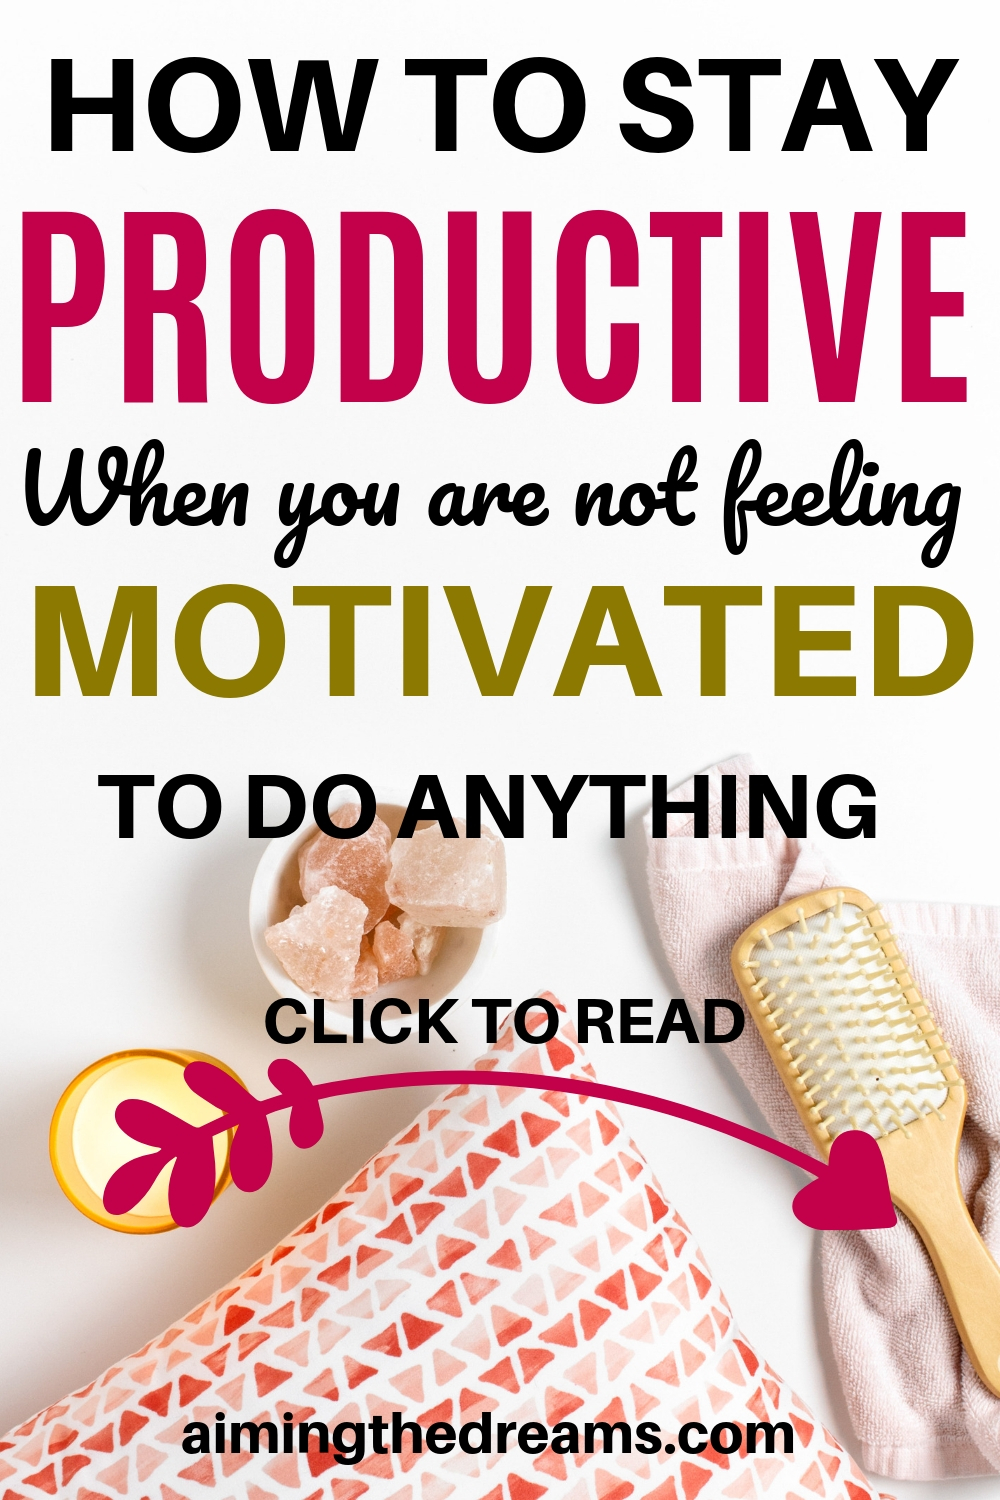 How to stay productive when you are not feeling motivated to do anything